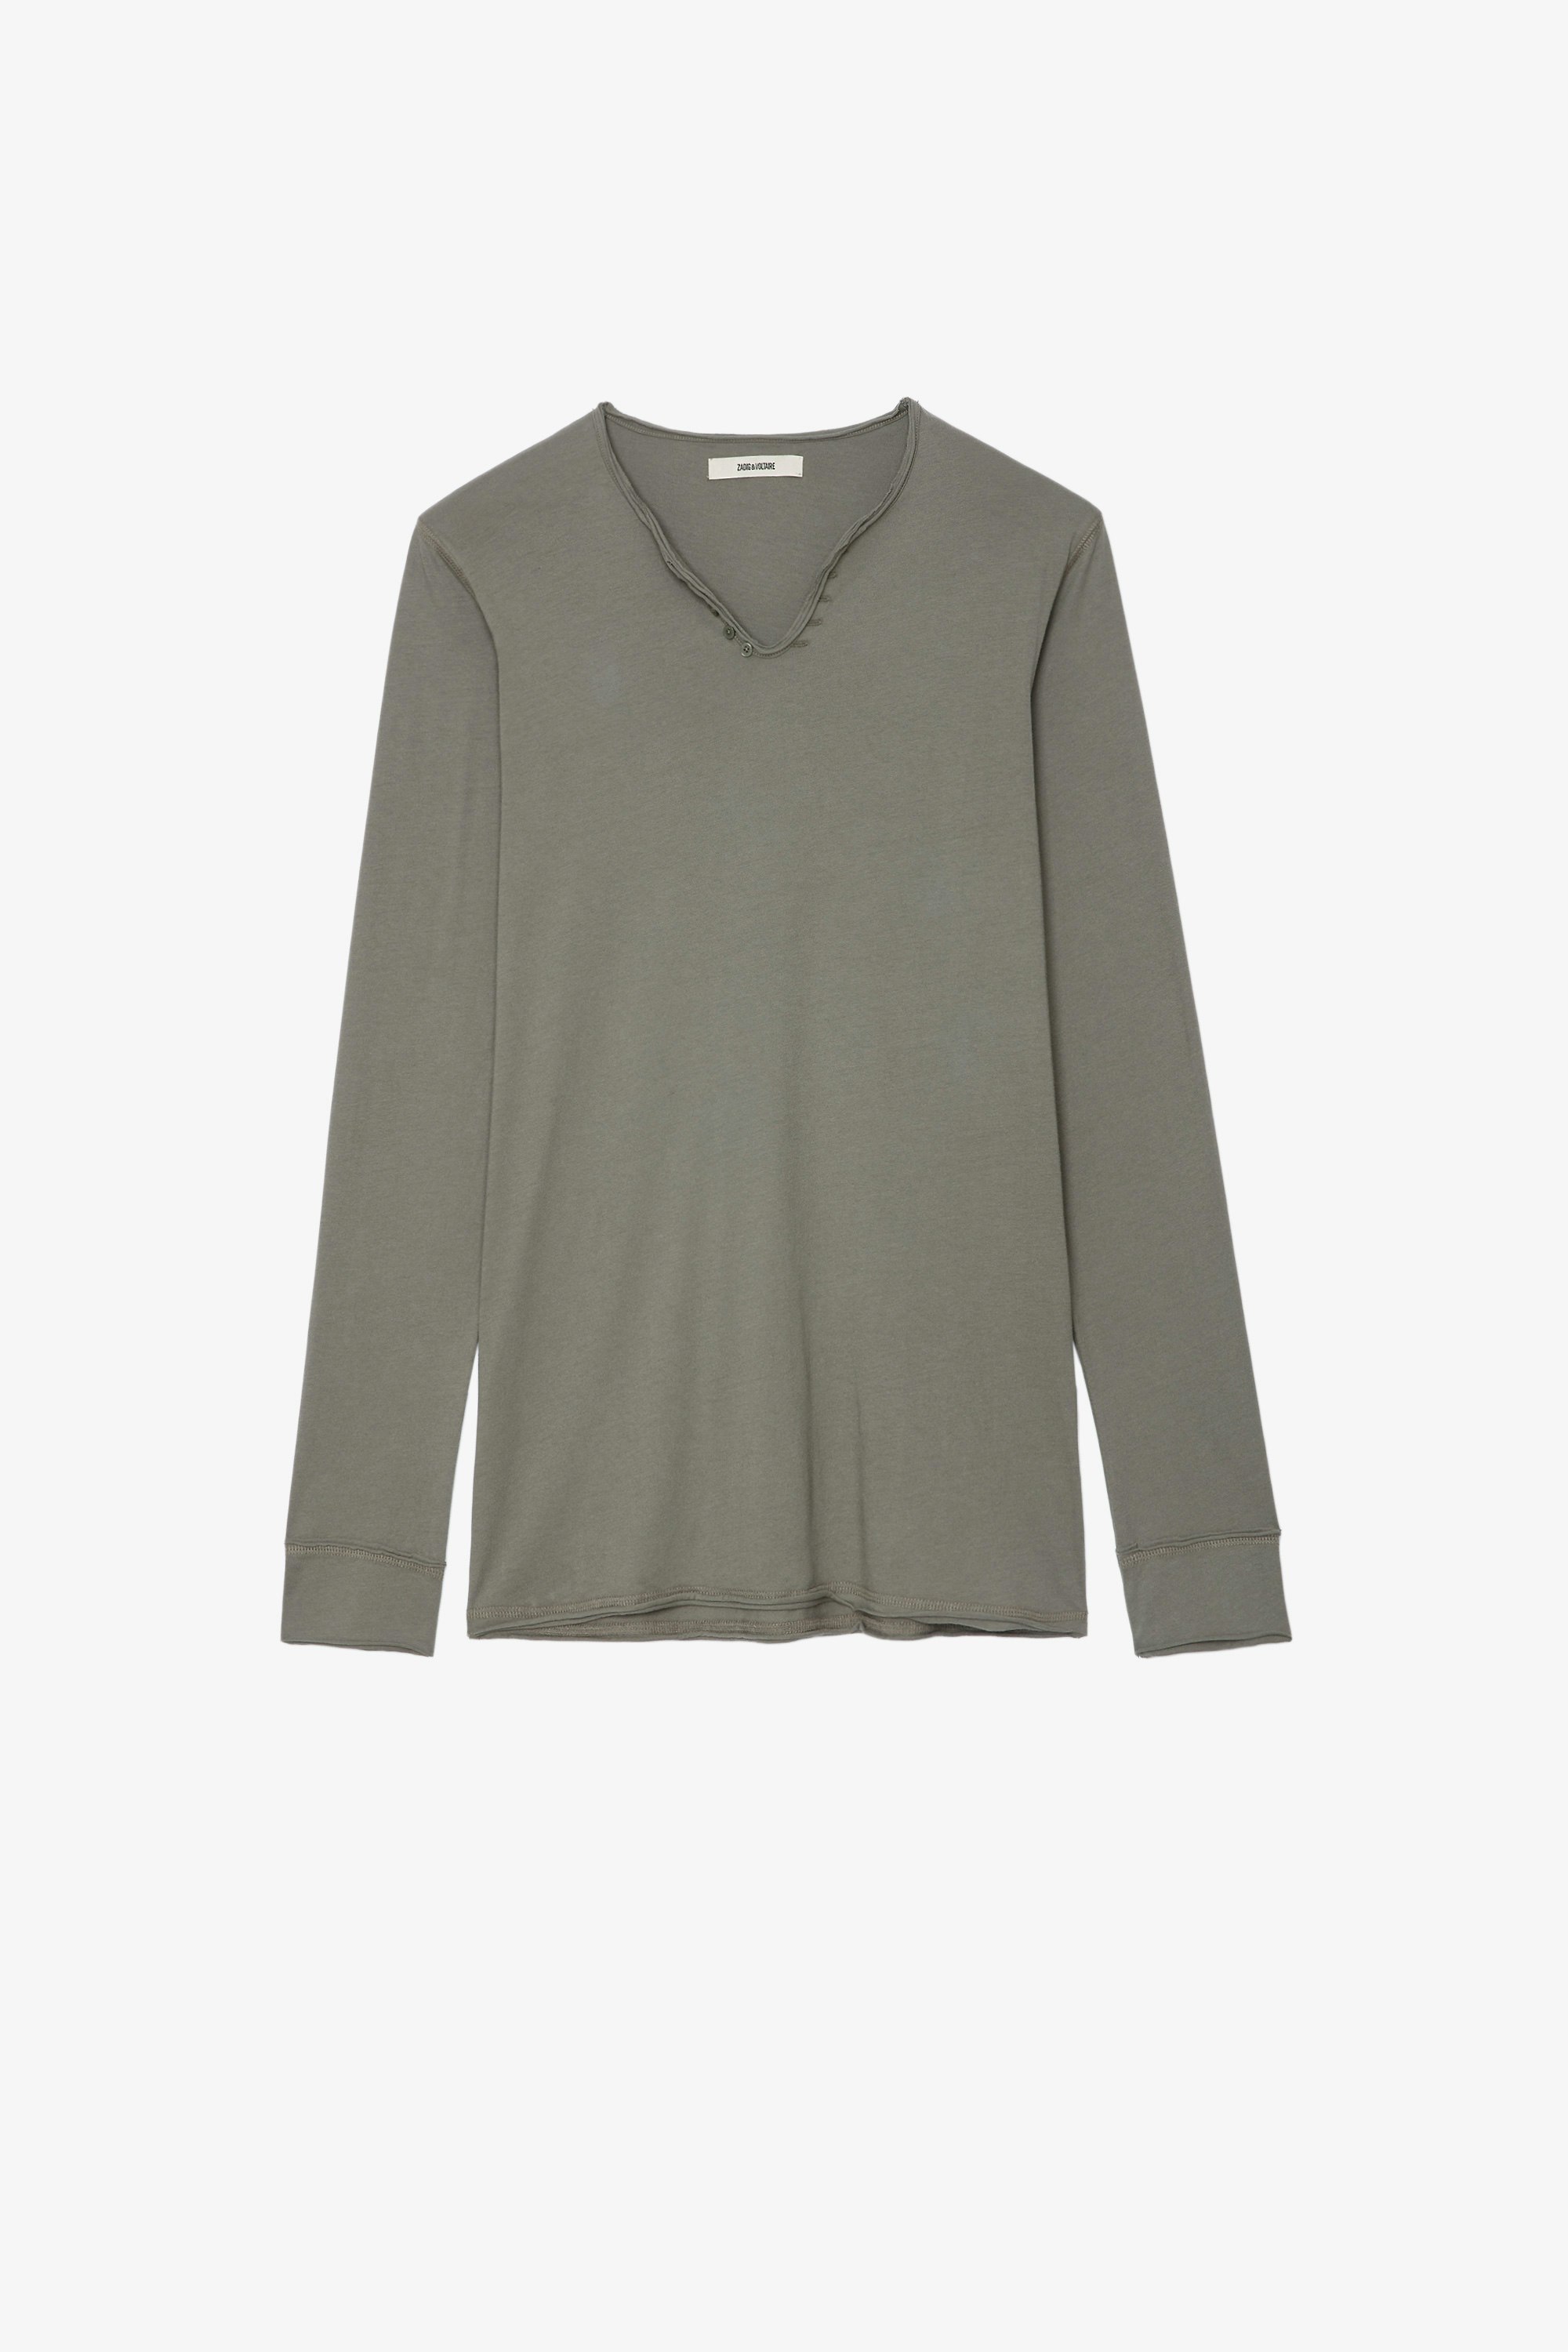 Monastir T-Shirt Men's long-sleeve T-shirt in green cotton and with Henley neckline